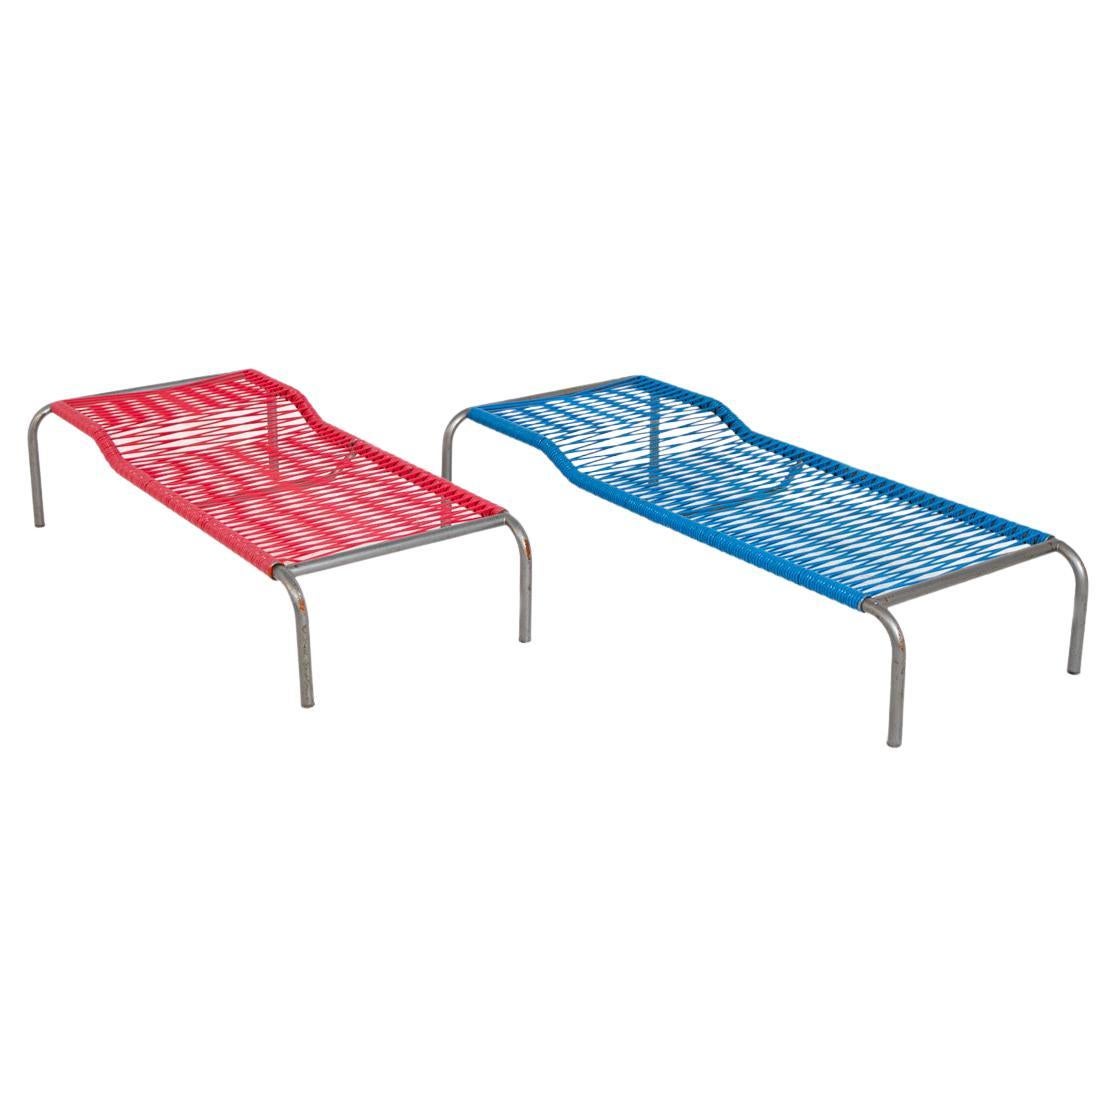 Pair of Italian Iron and Plastic Deckchairs Red and Blue